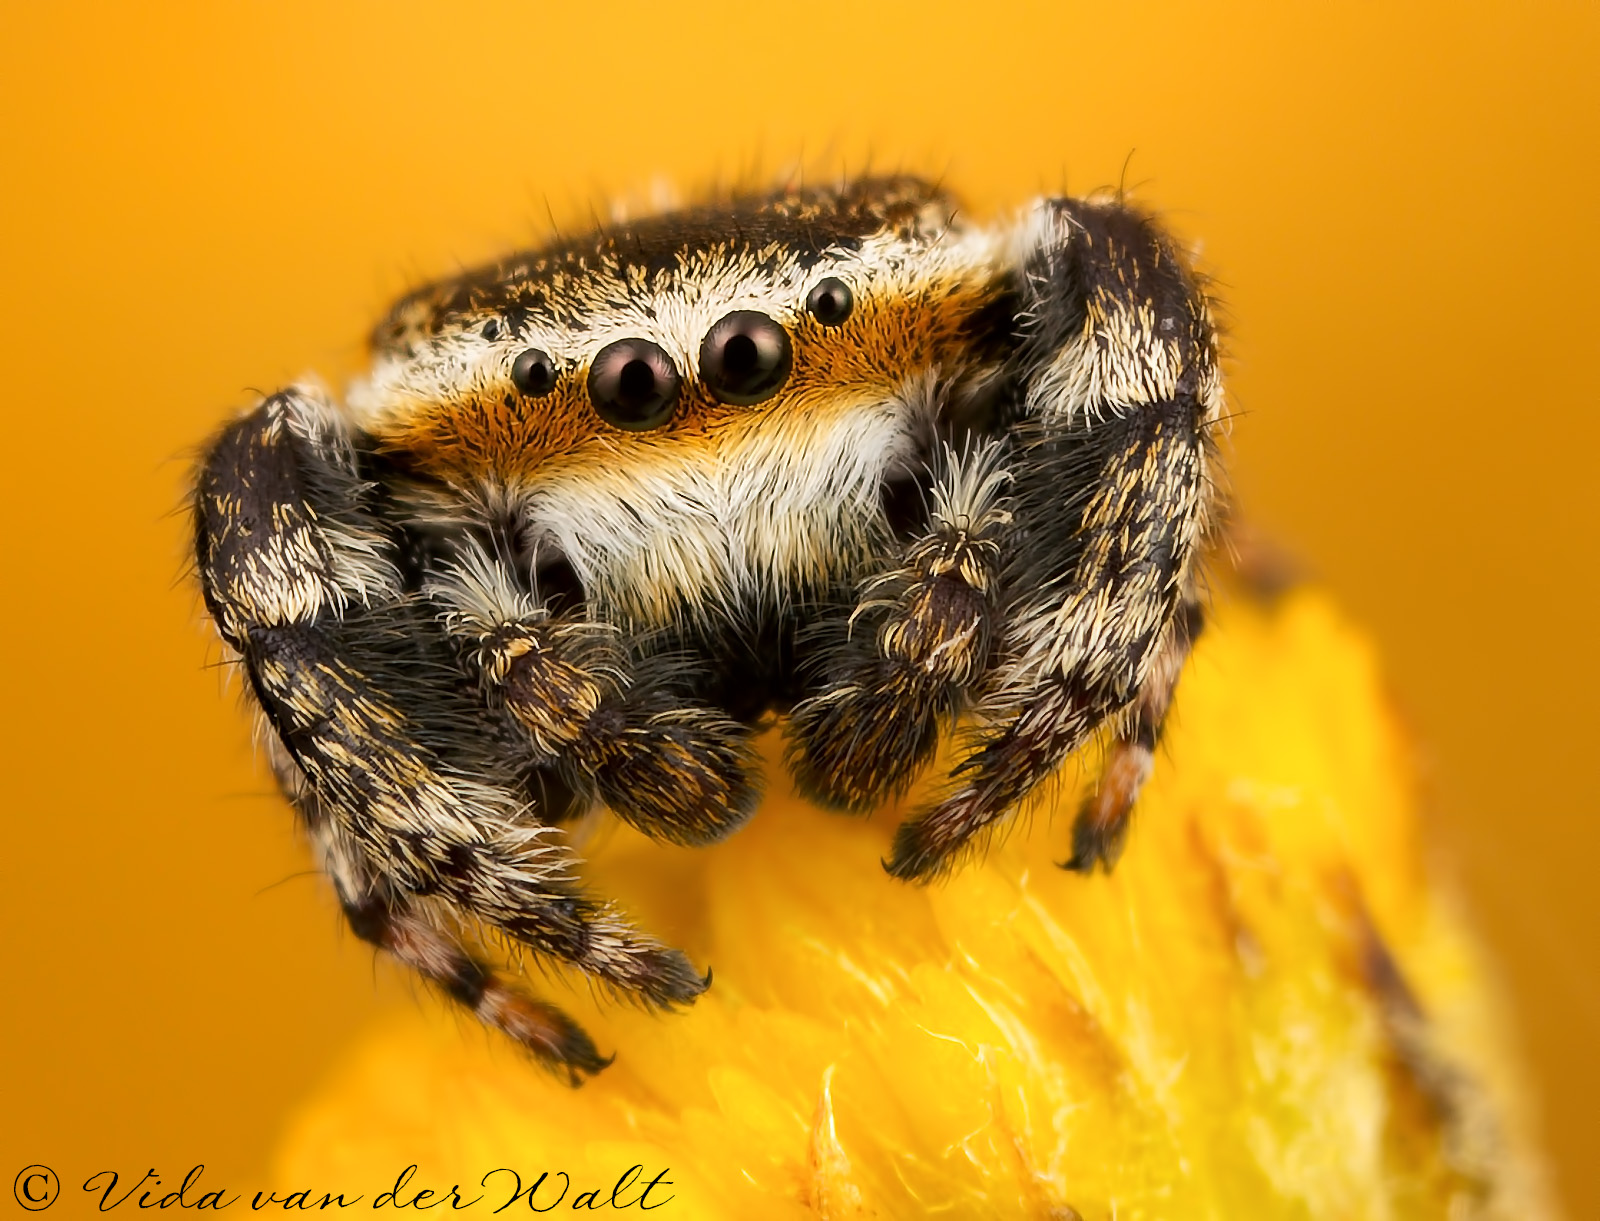 http://www.jumpingspiders.co.za/images/main/184.jpg